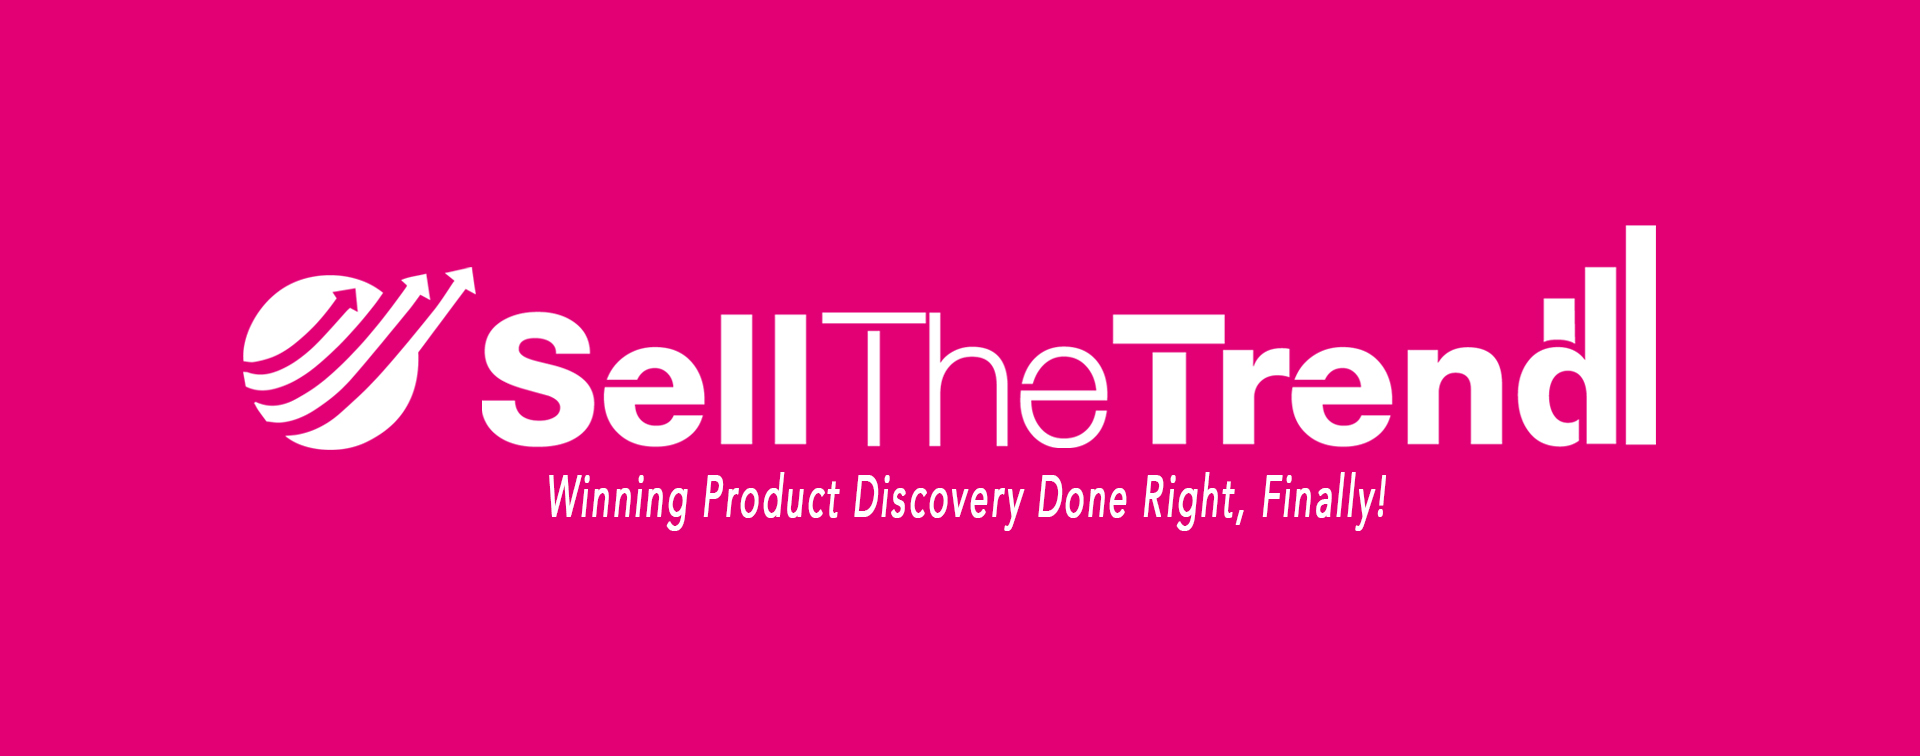 Sell The Trend group buy account - Reviews, NEXUS research, dropship product, shopify store, facebook ad, video ads creator, amazon trend, pricing and discount with coupon code